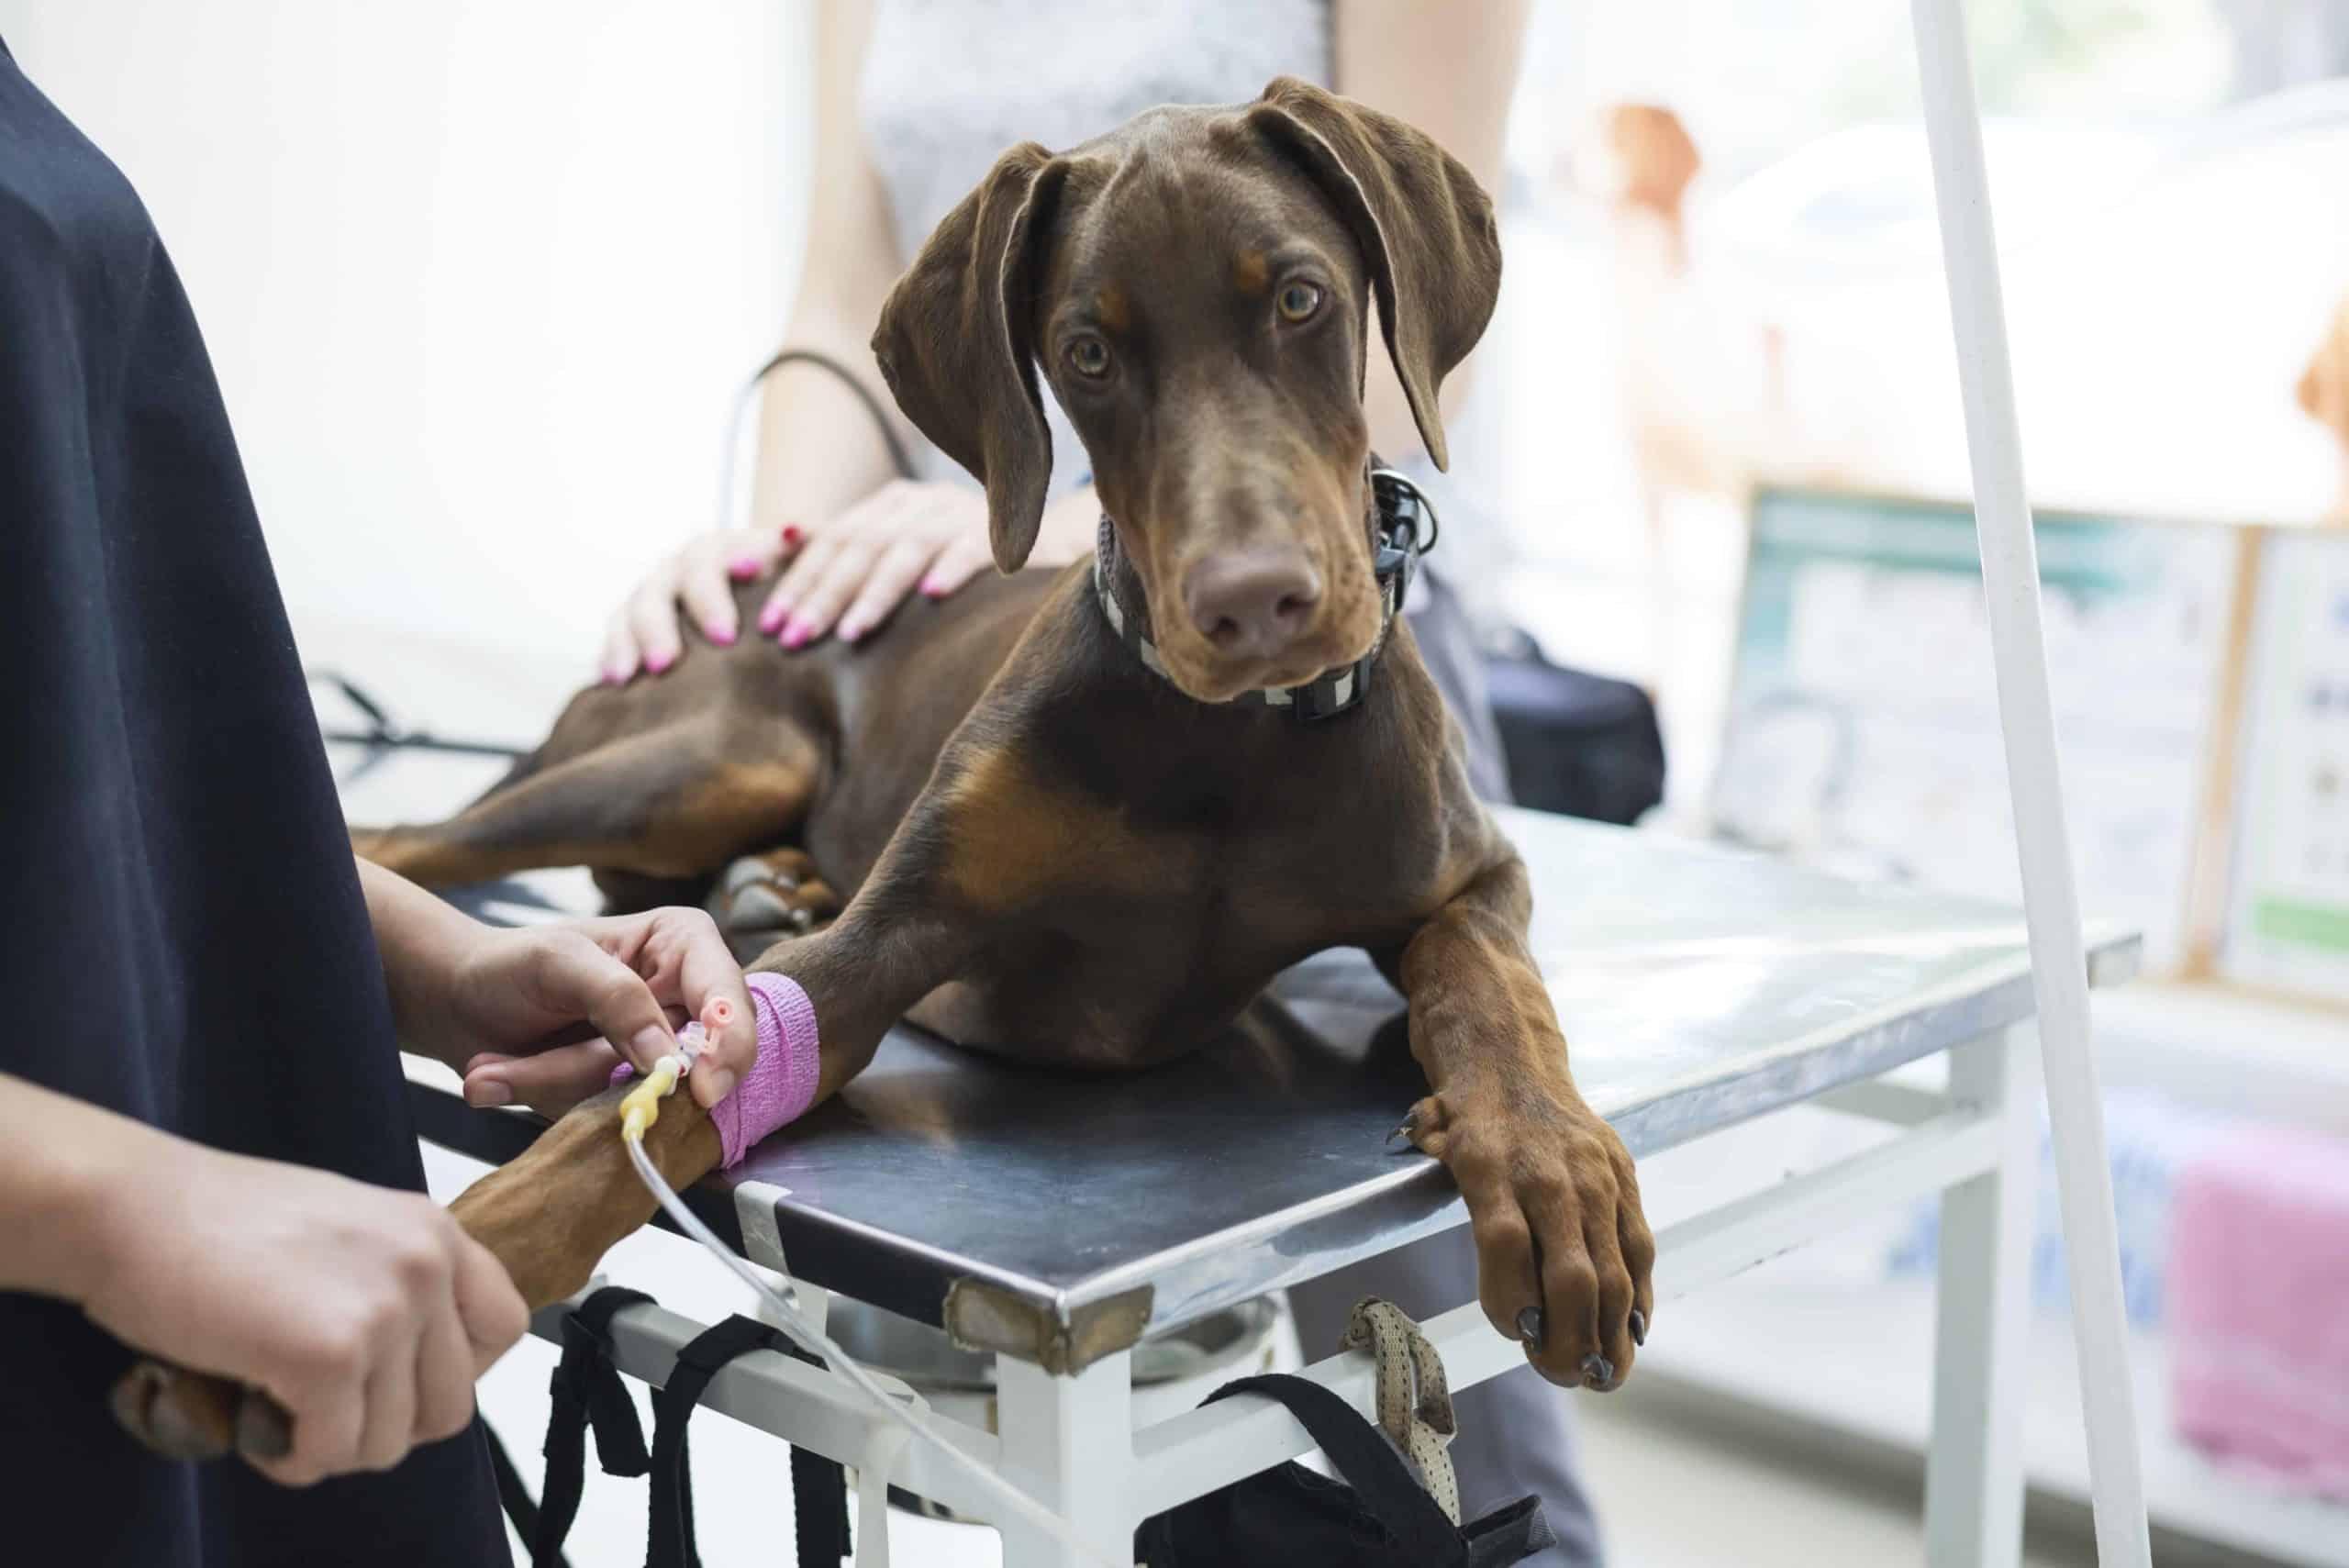 Doberman puppy gets infusion. Evaluate a potential pet insurance provider by comparing plans, looking at online reviews, coverage specifics, and reimbursement options.